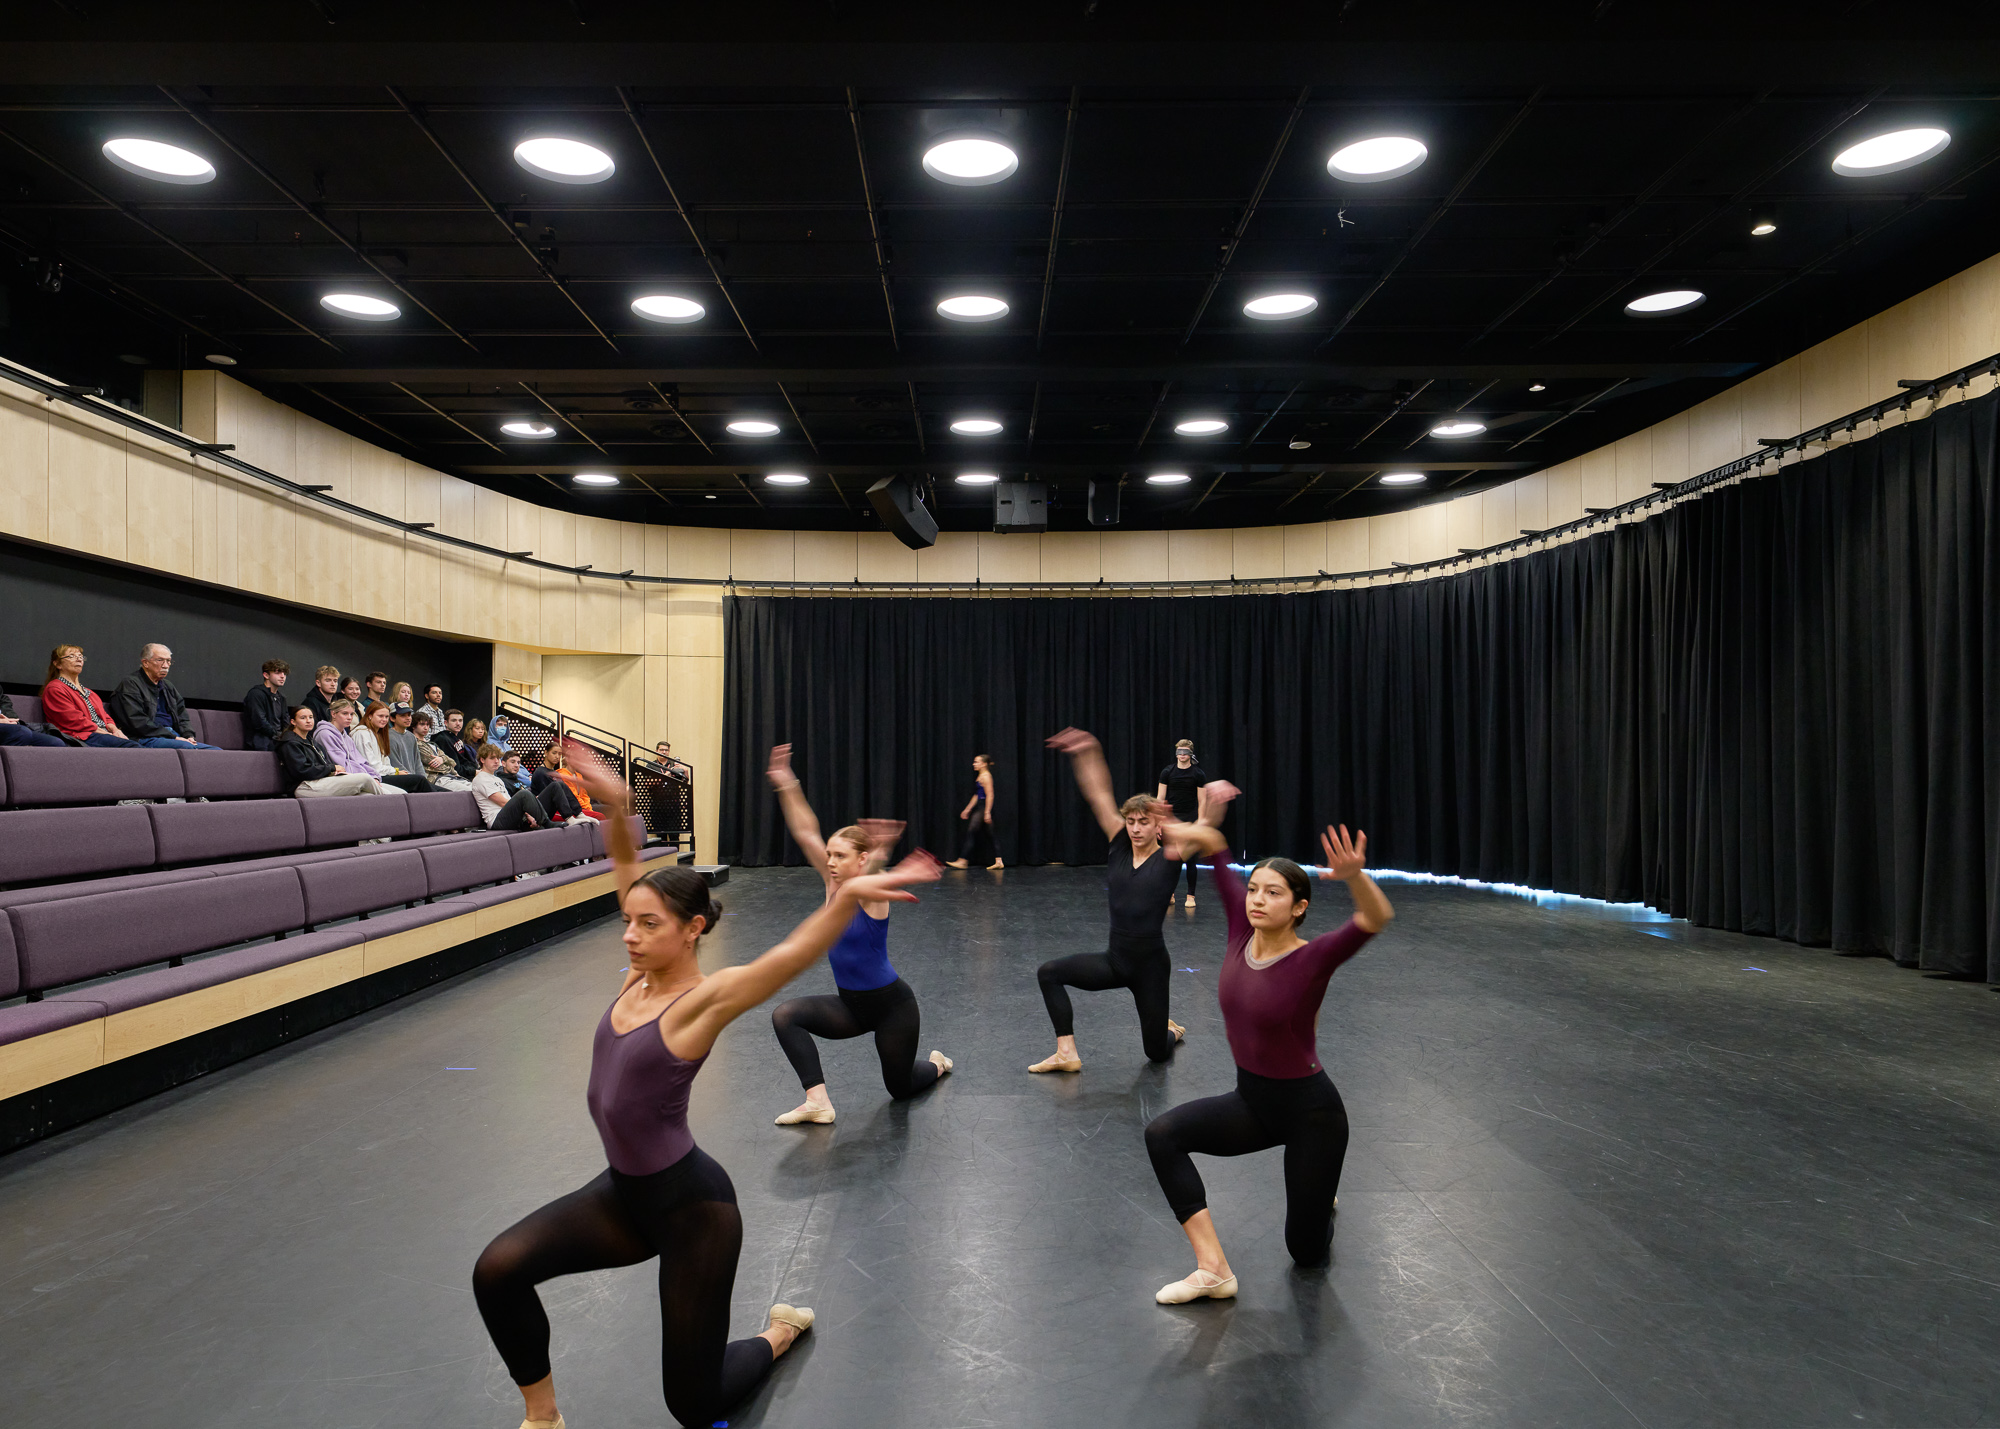 The main performance studio stands out for its theatrical systems and architectural lighting, enabling effortless transitions from a studio classroom to a captivating performance venue, ideal for dance. Sandi Simon Center for Dance at Chapman University, Orange, California. © Eric Staudenmaier